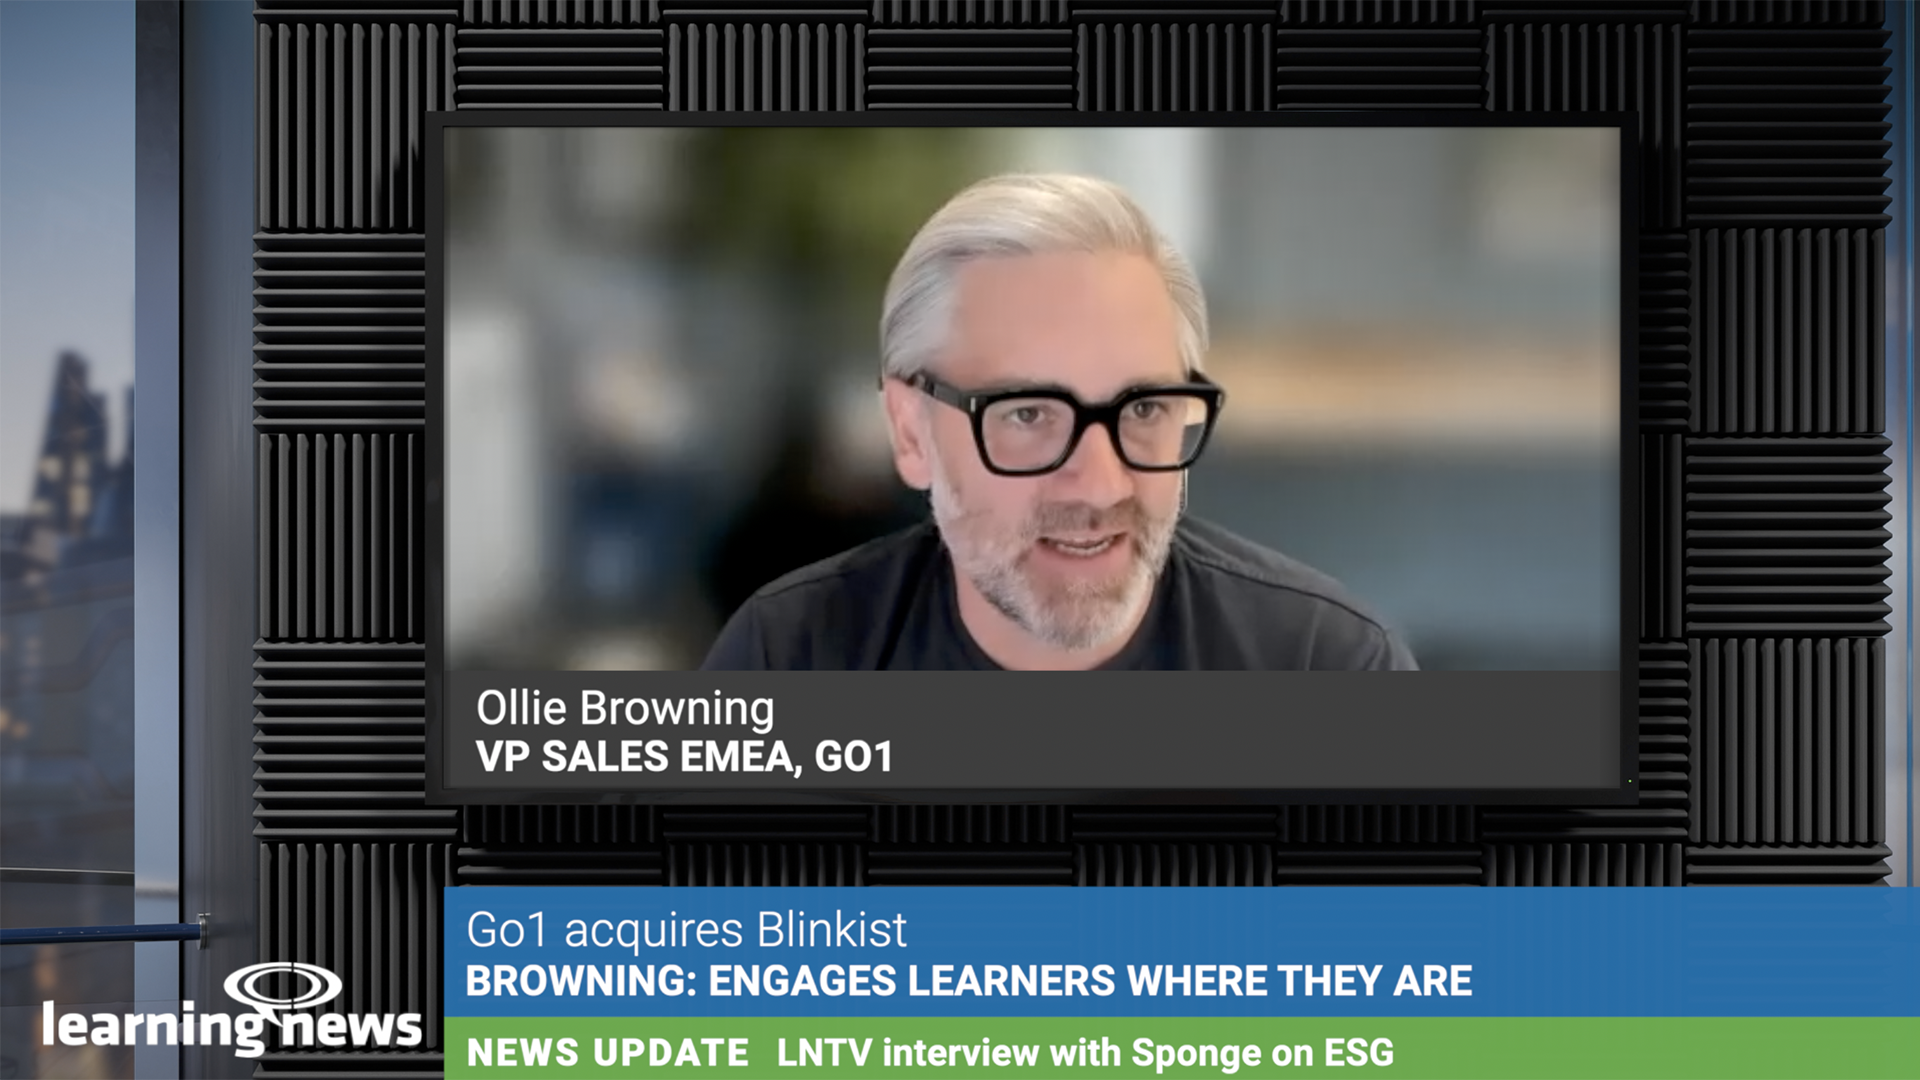 Ollie Browning: Go1’s acquisition of Blinkist and a new model for consumption of learning content